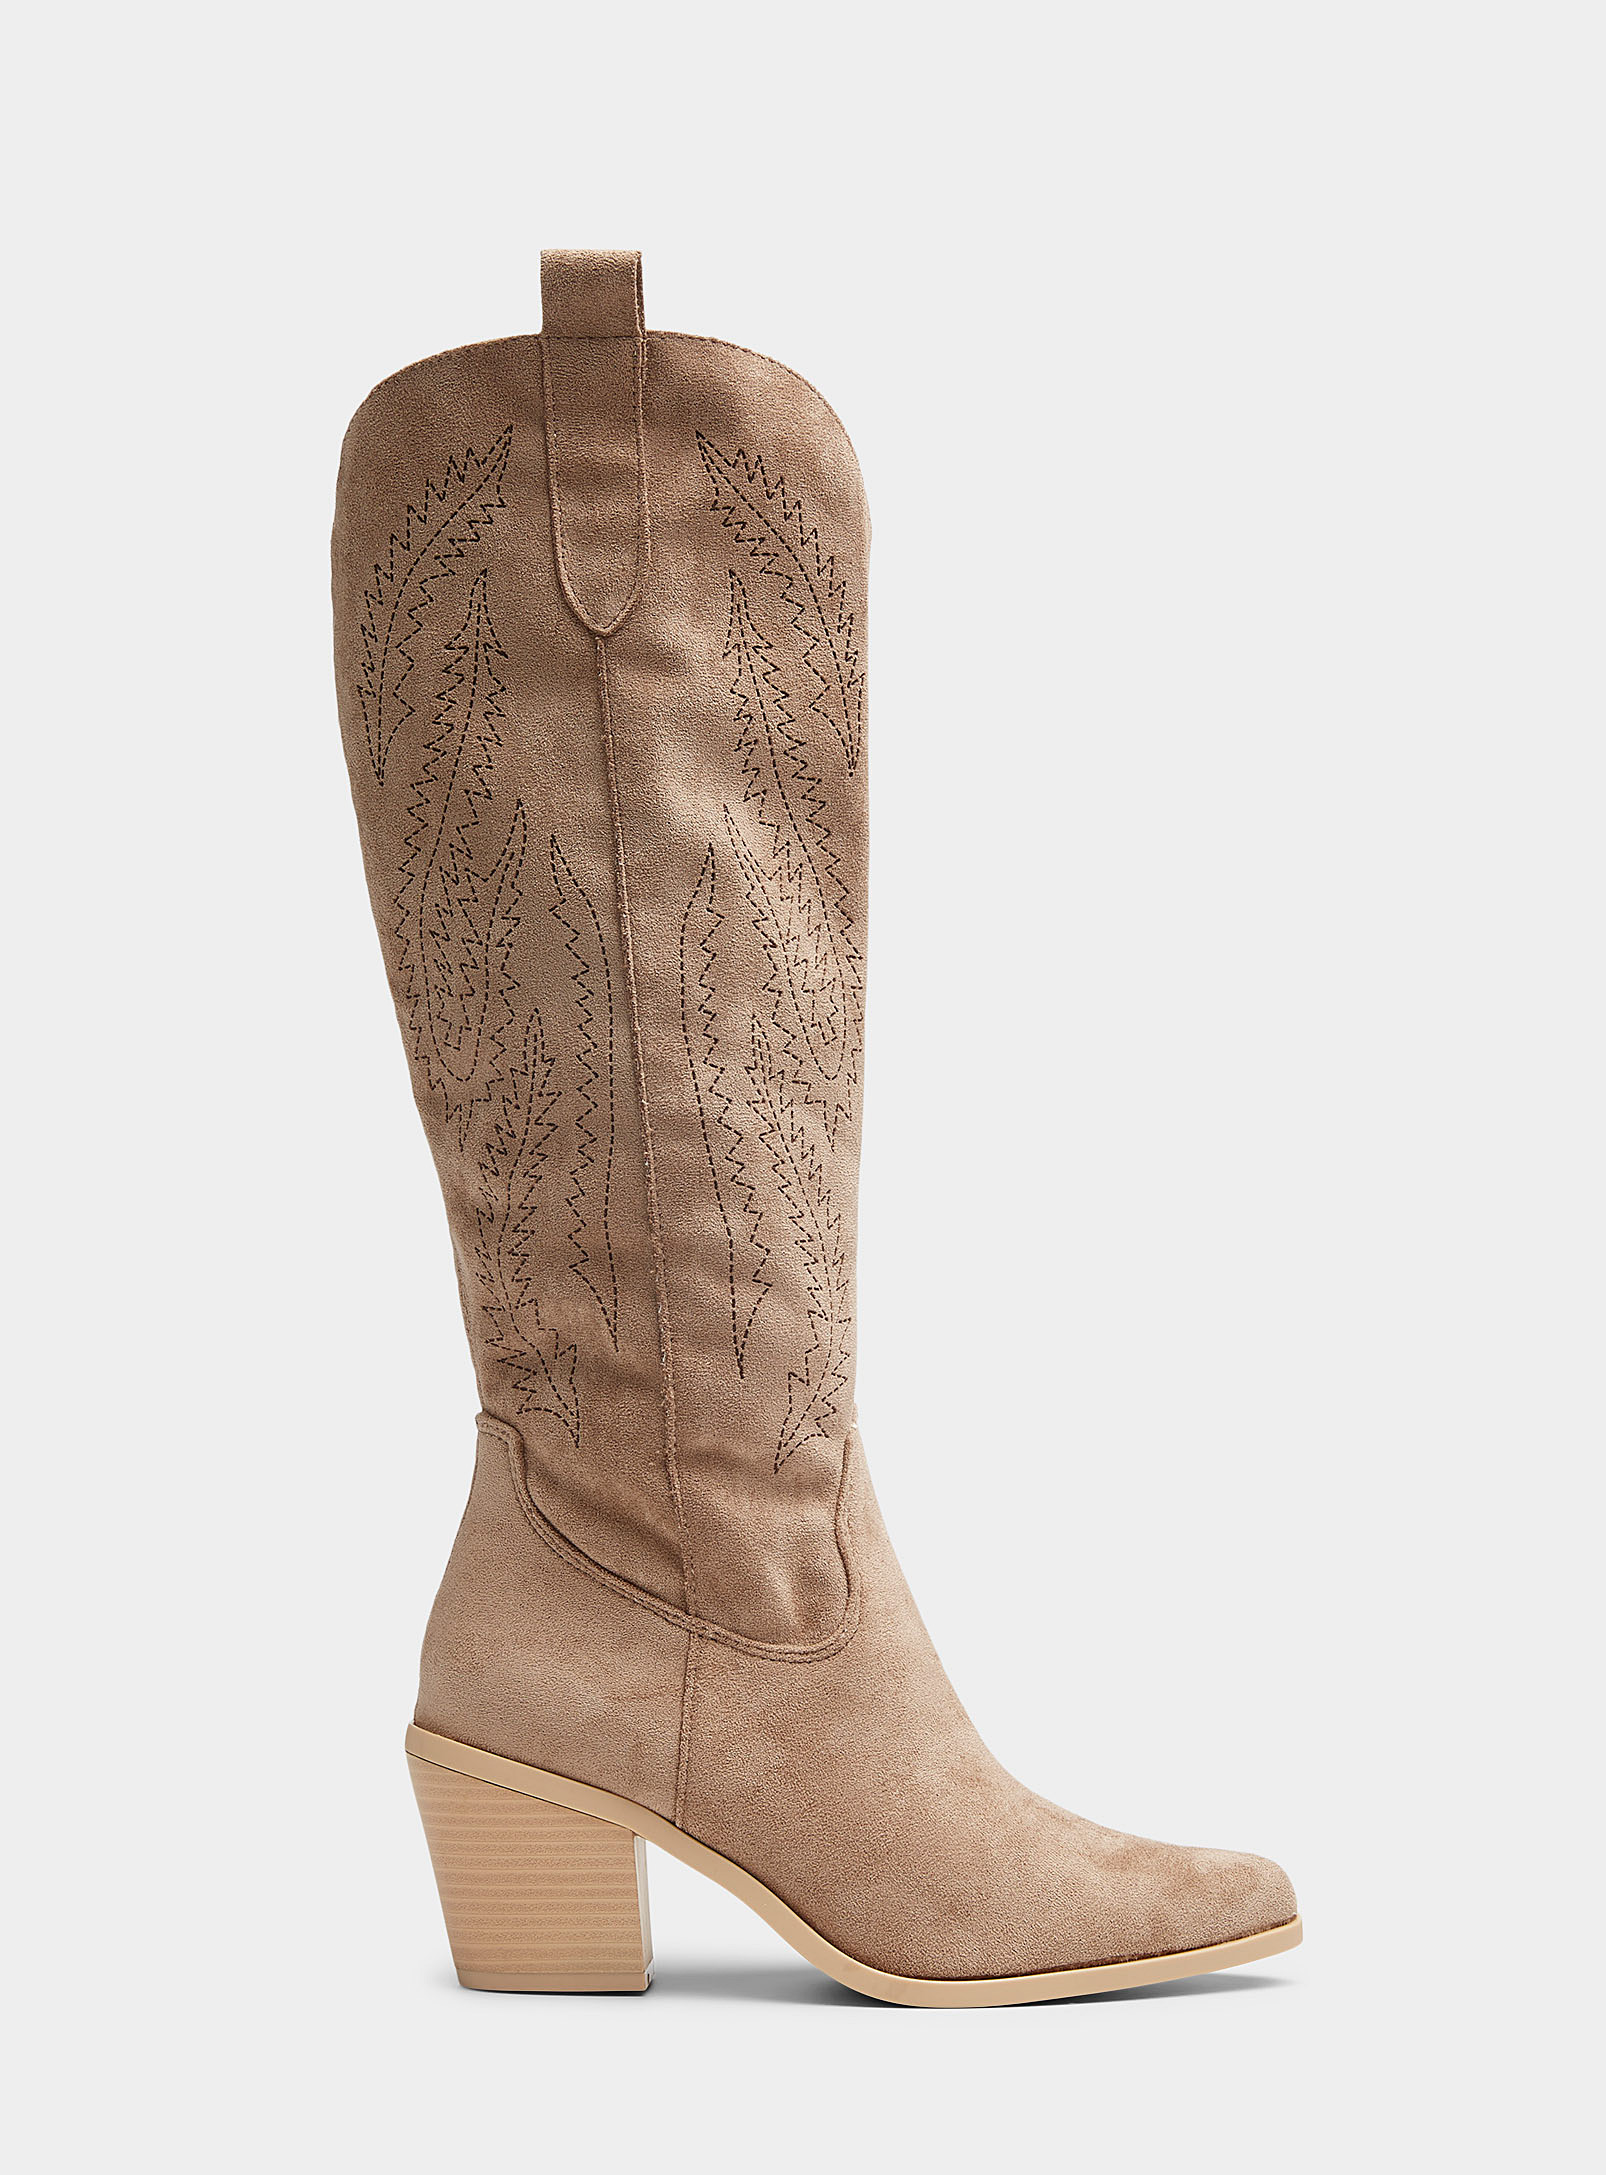 Simons - Women's Embossed pattern cowboy boots